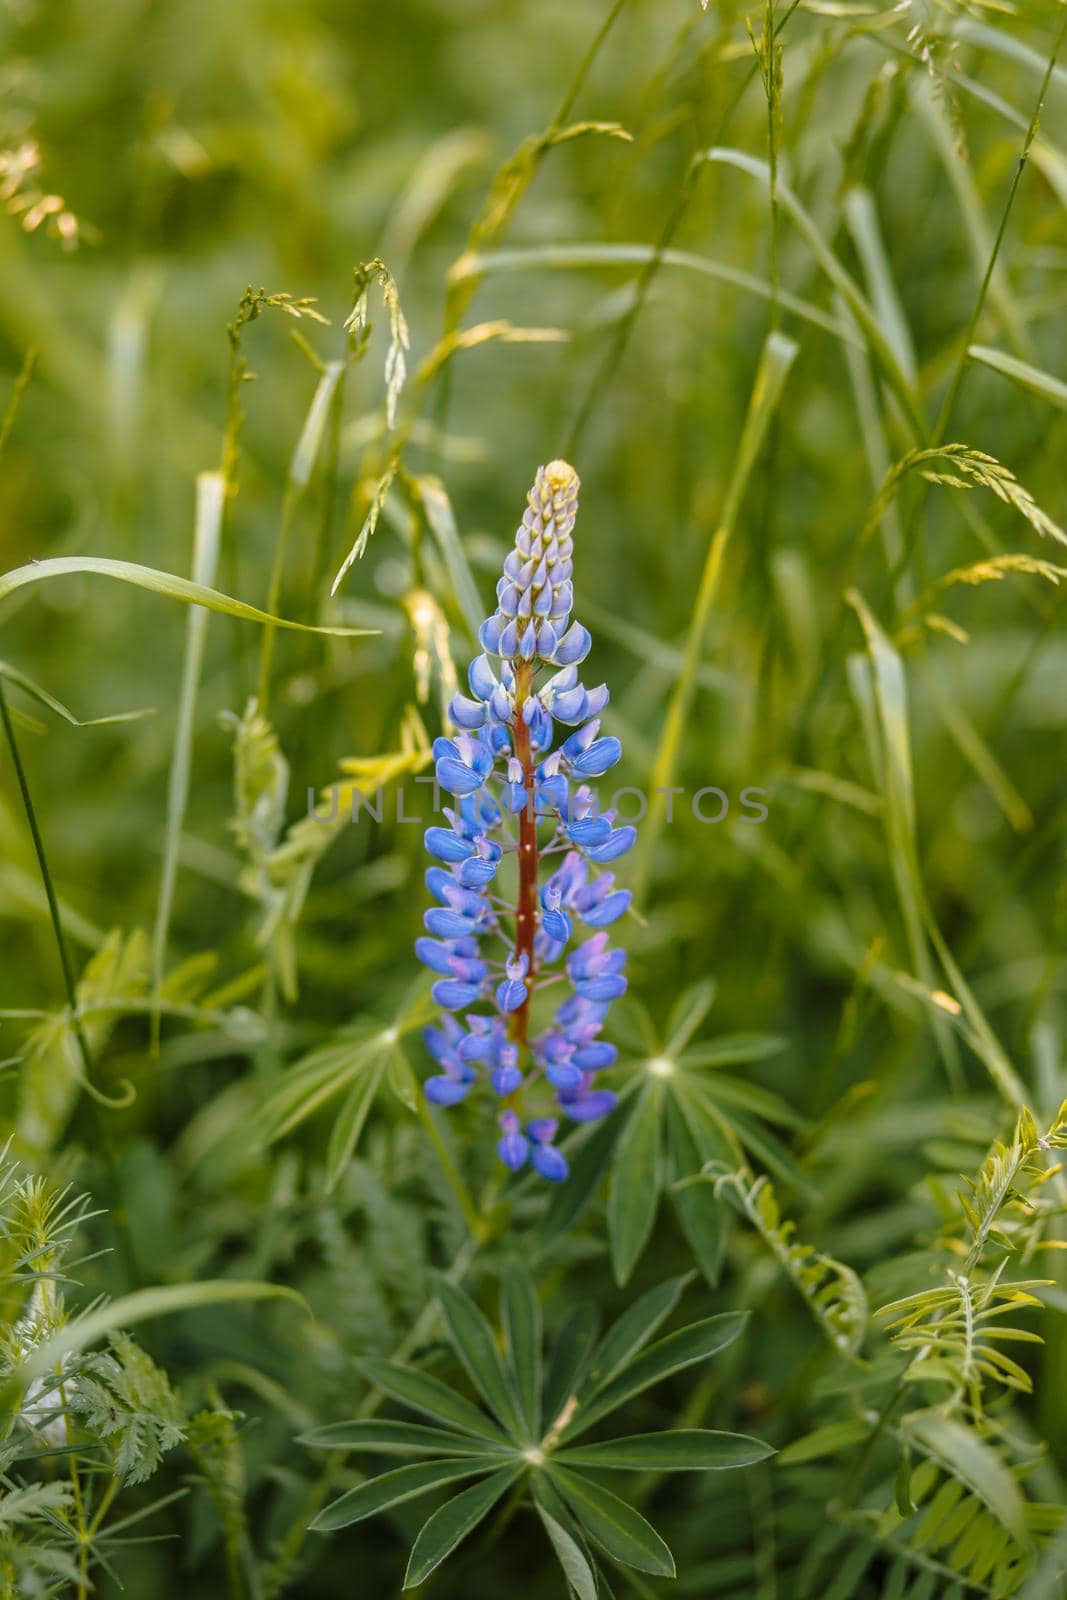 Lupin among the tall green grass by deandy